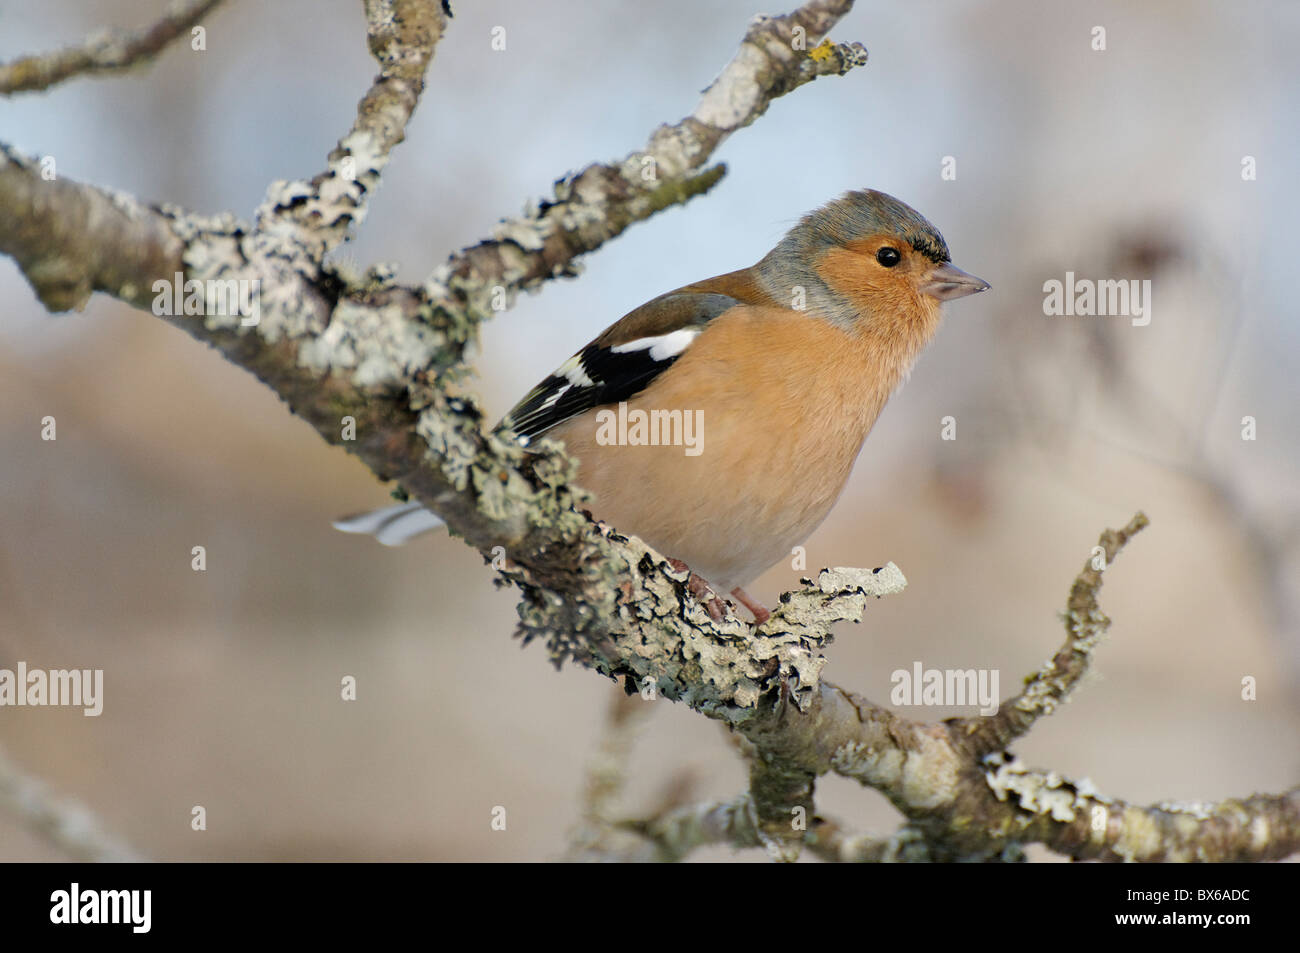 A male Chaffinch stood on a branch Stock Photo